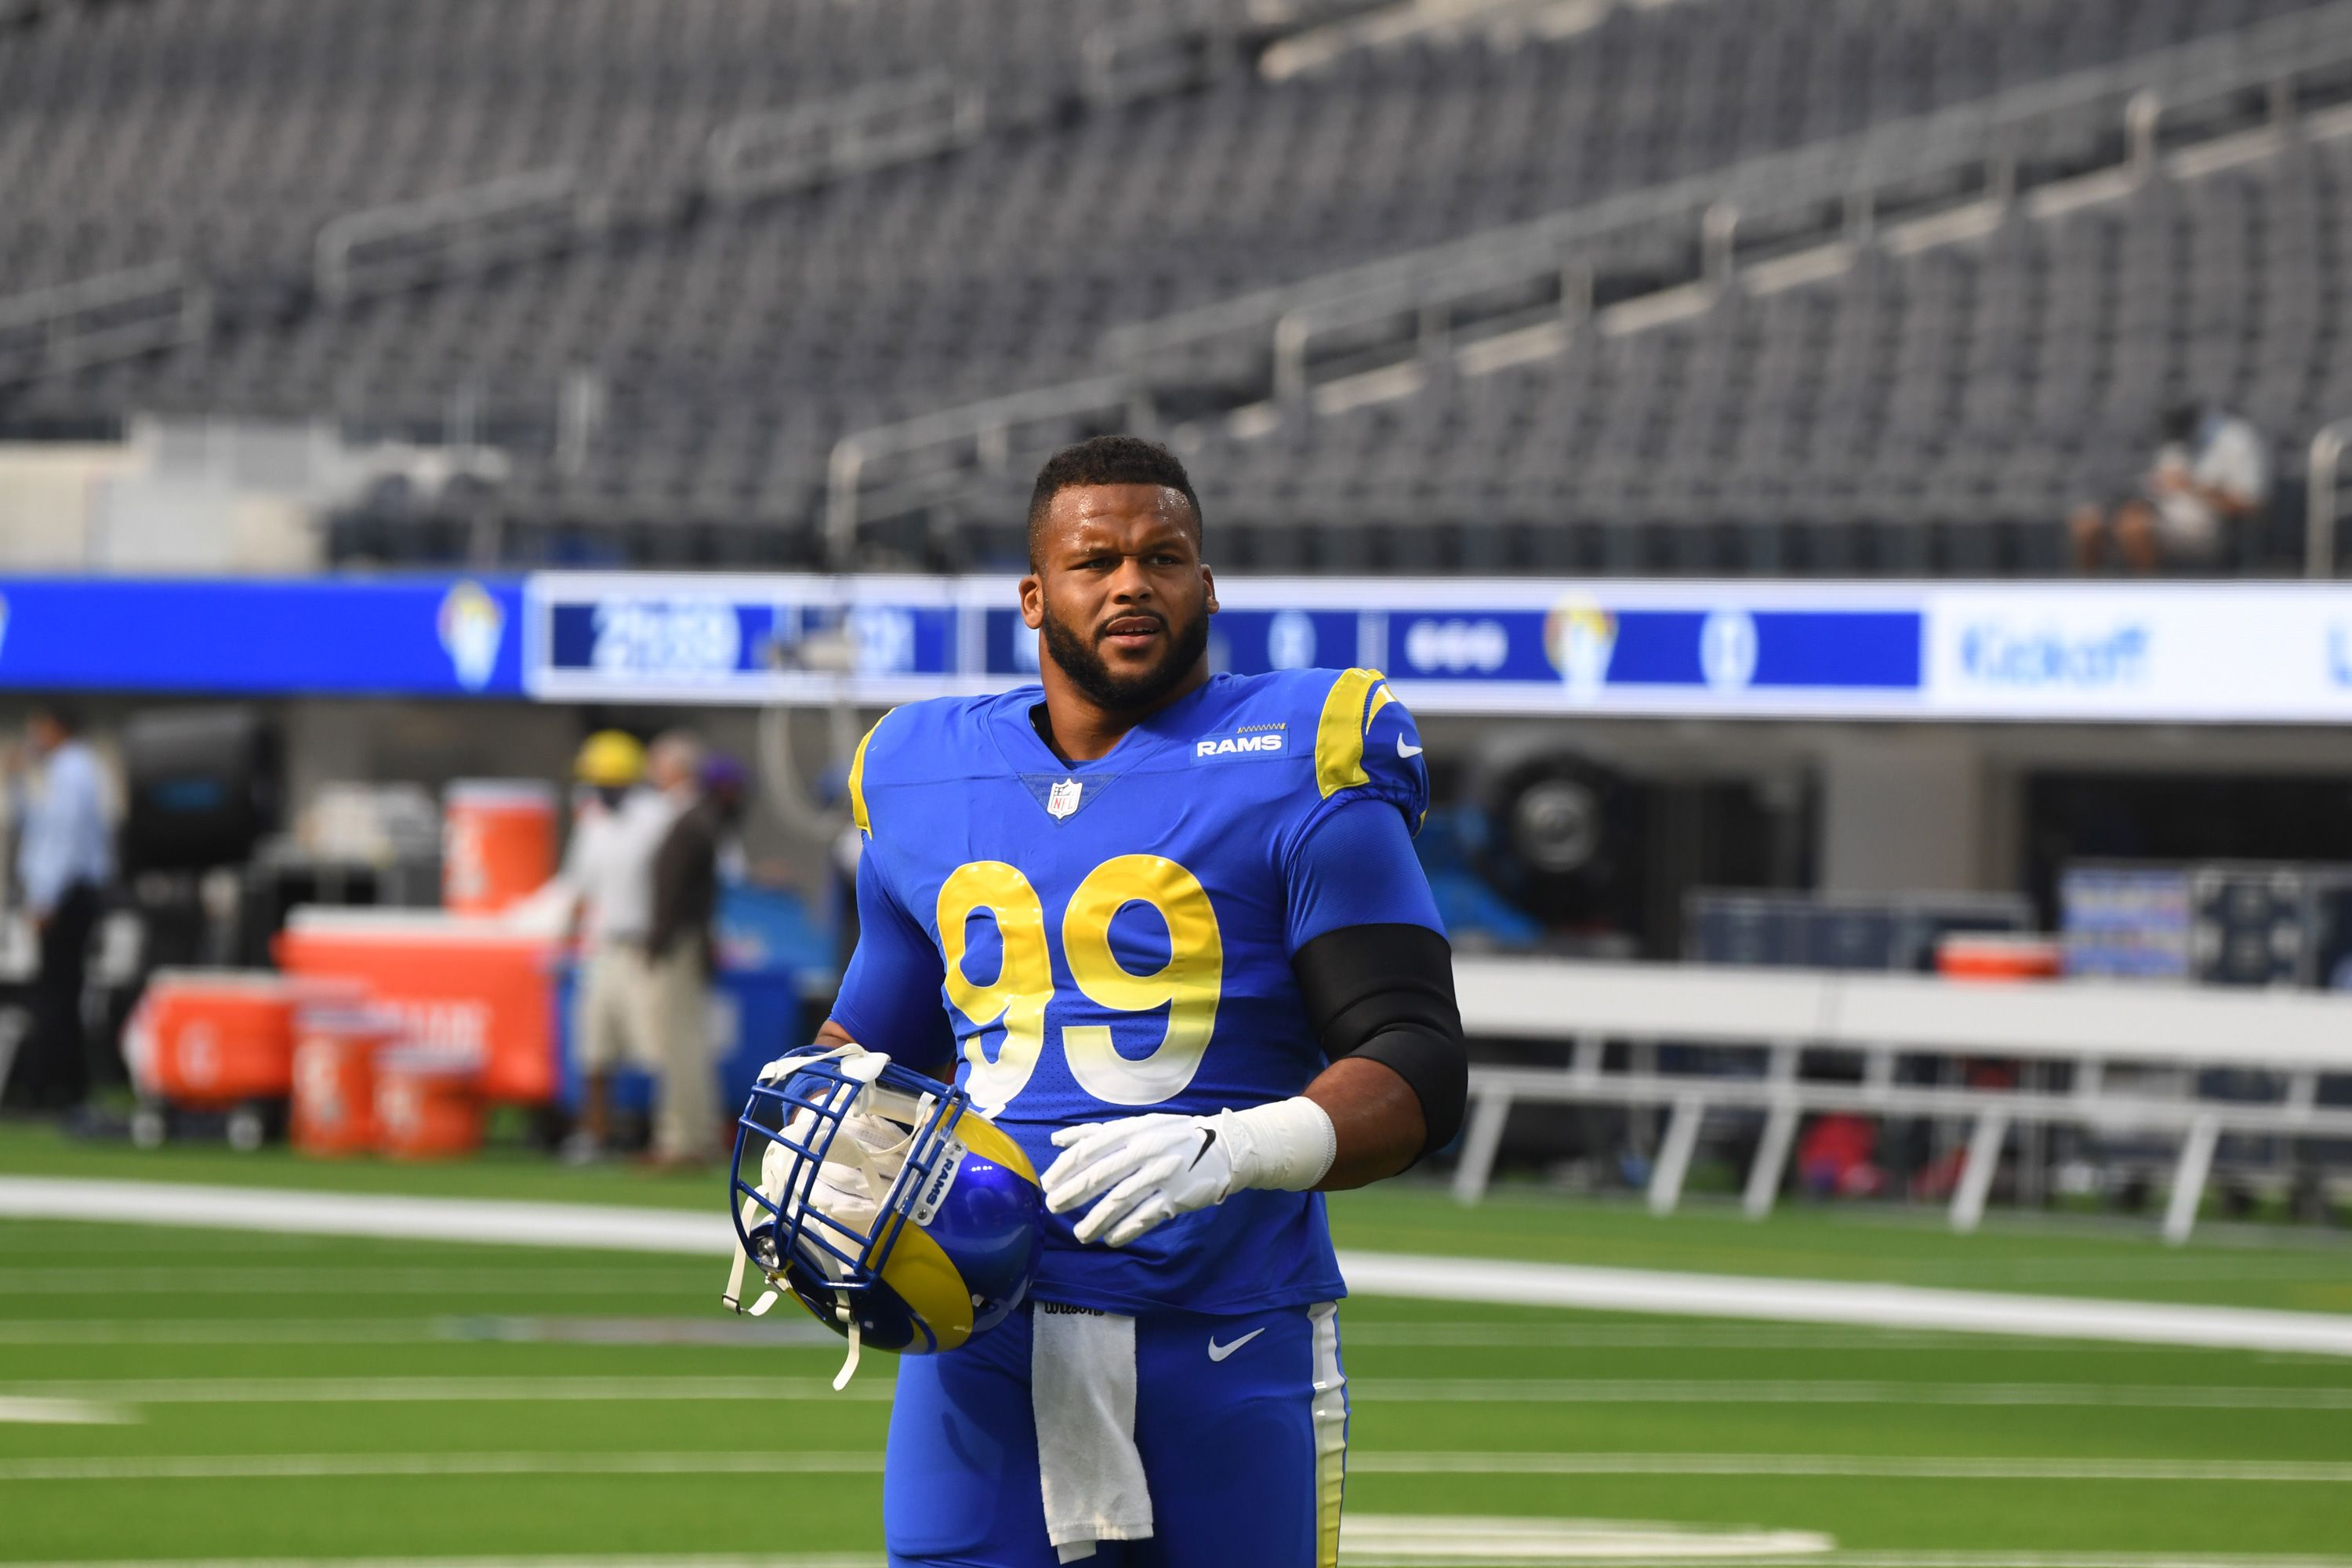 Aaron Donald says he'll remain with Rams and continue playing